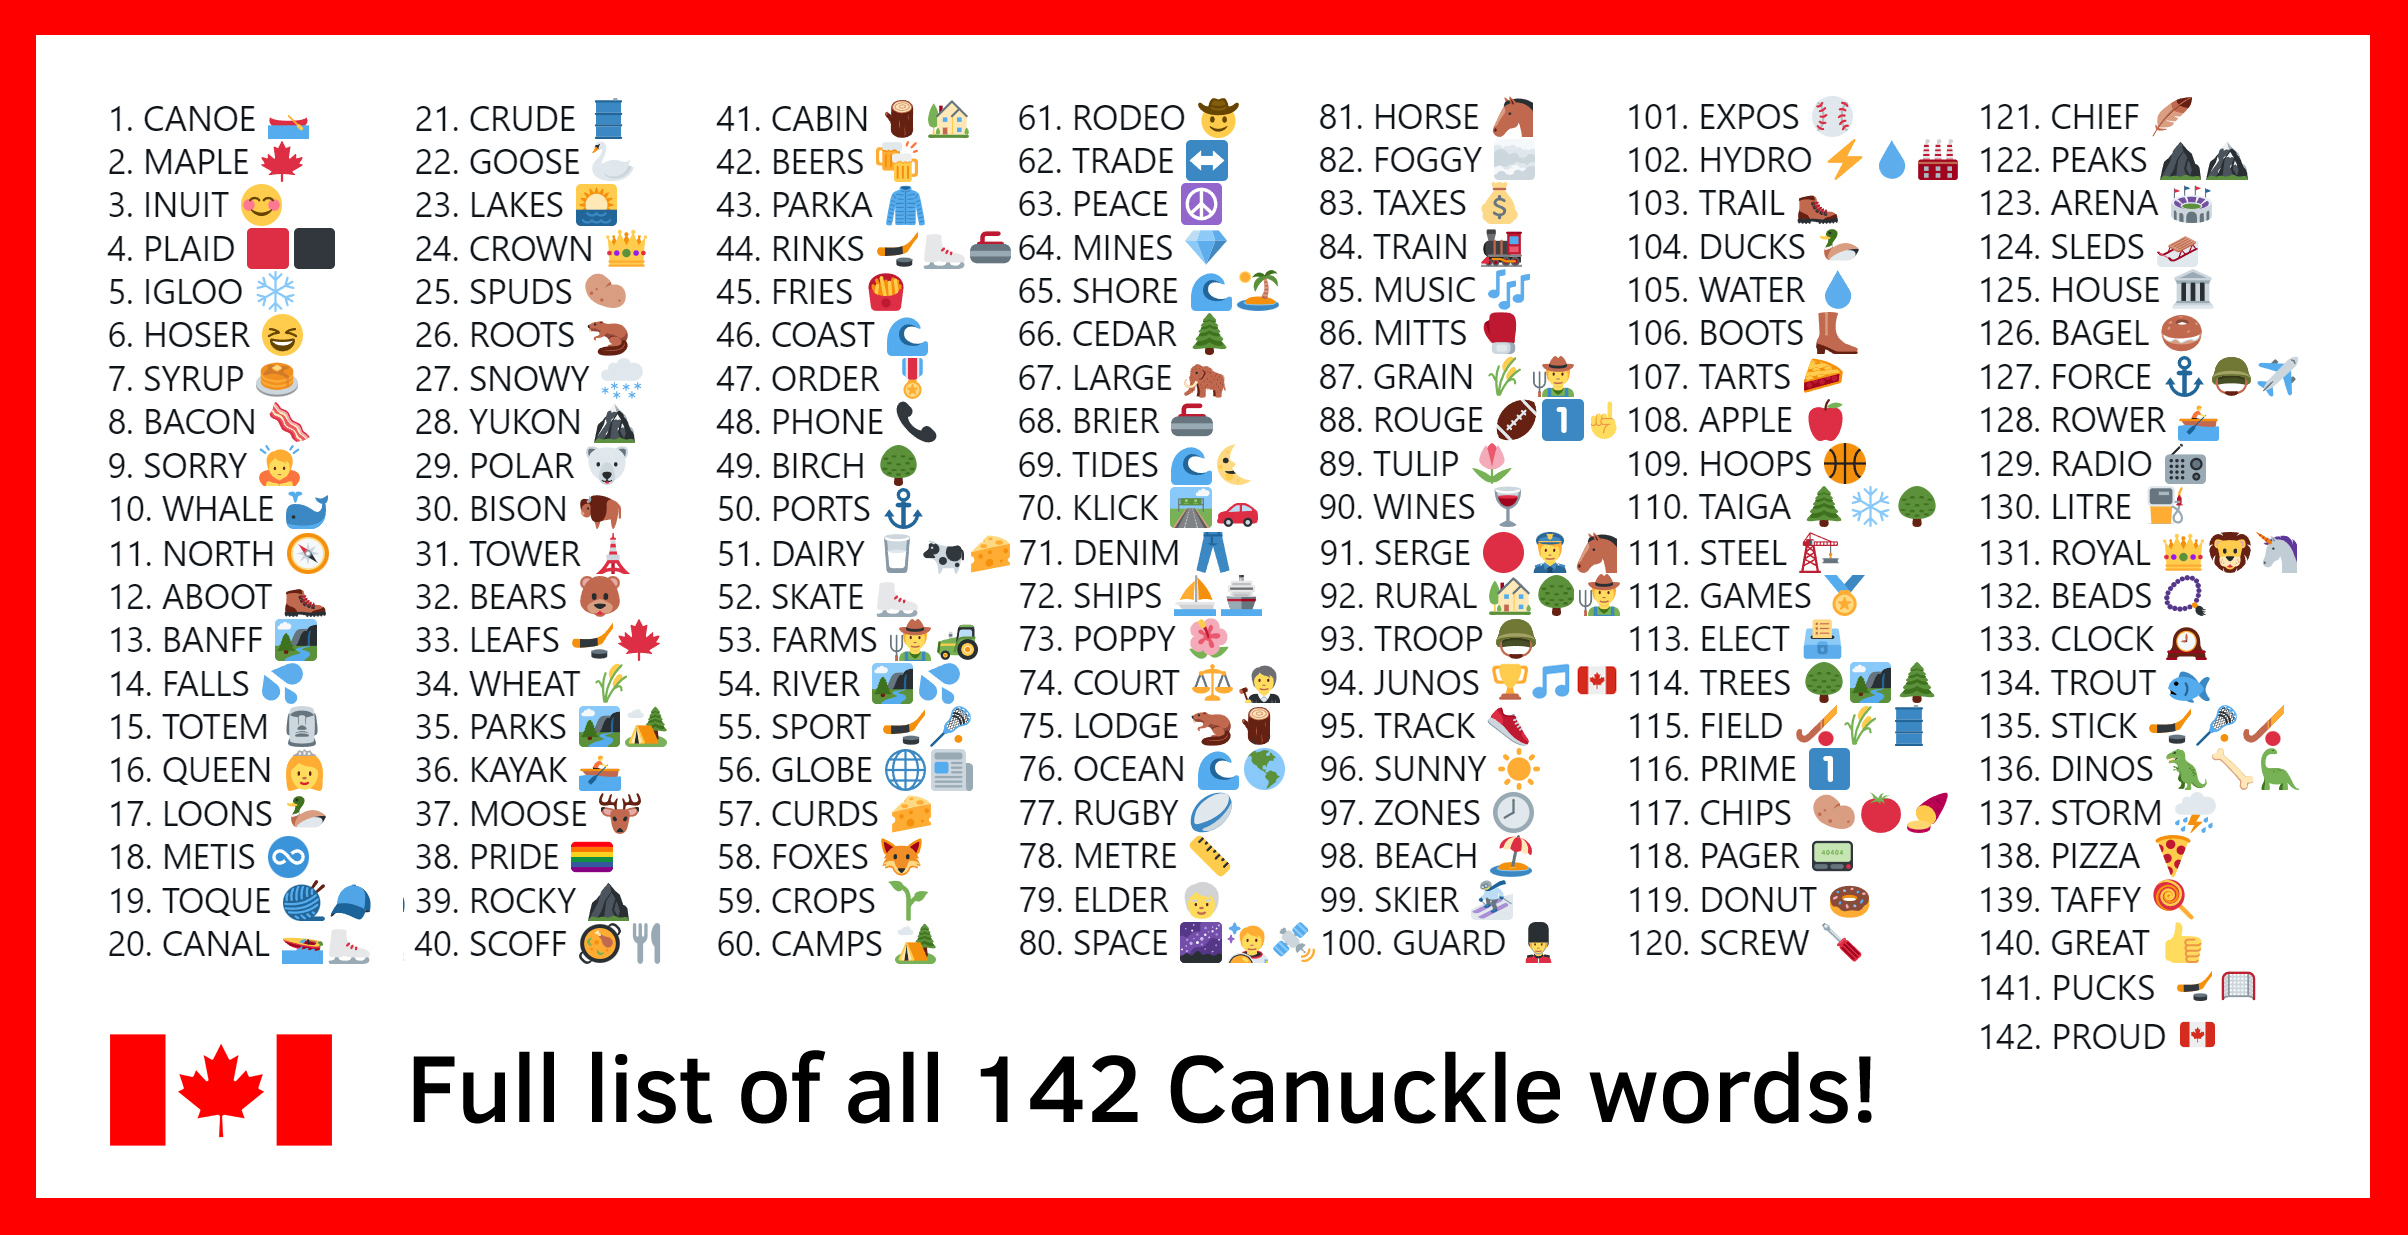 Full list of all 142 Canuckle words!